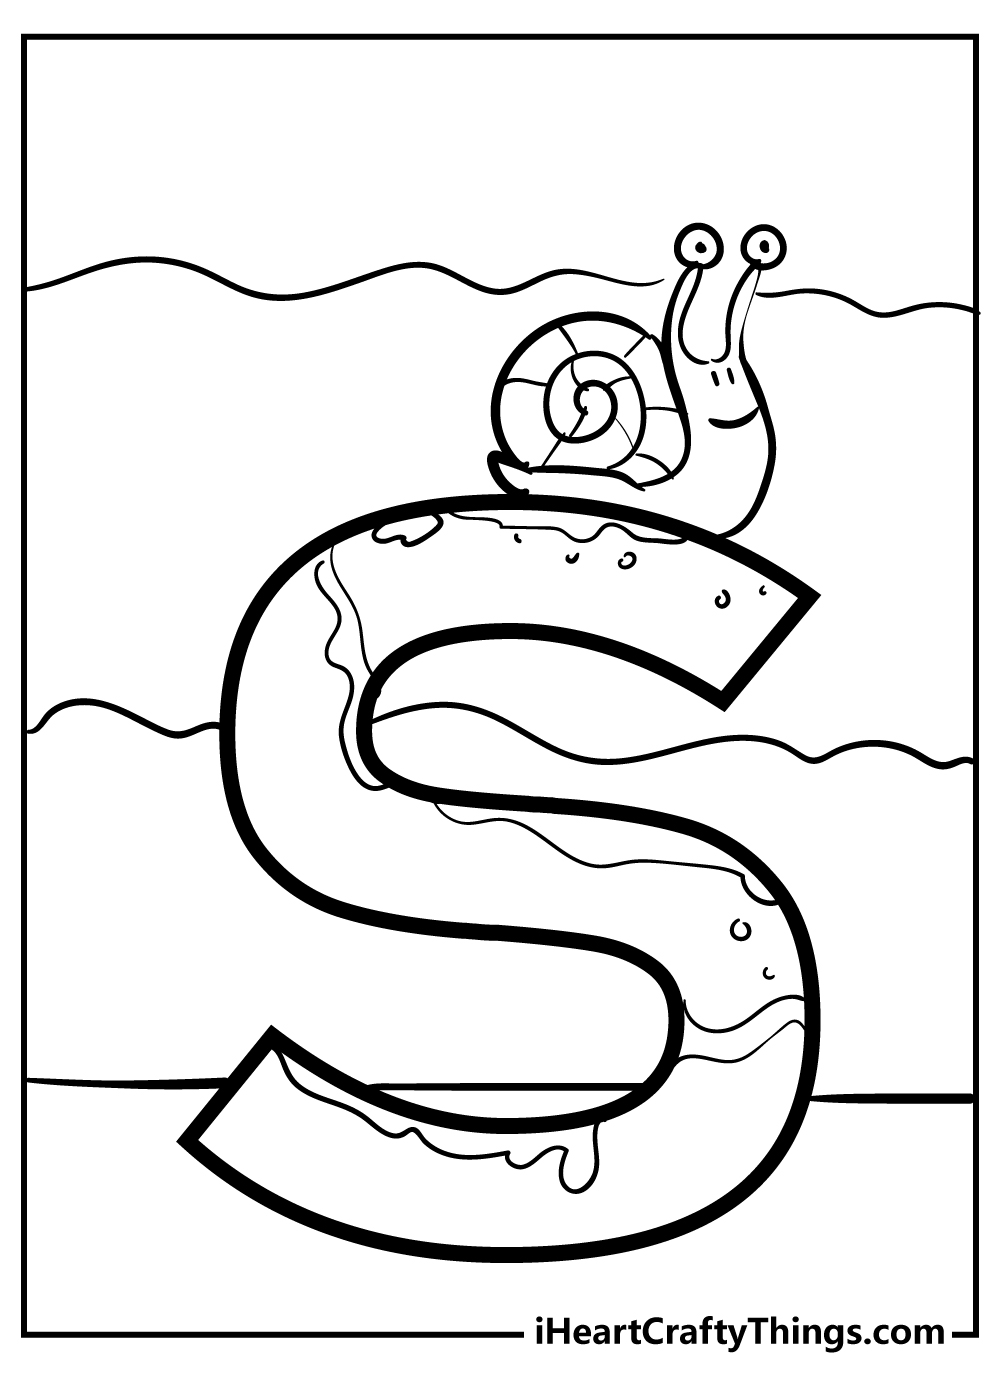 Printable Letter S Coloring Pages Updated 20